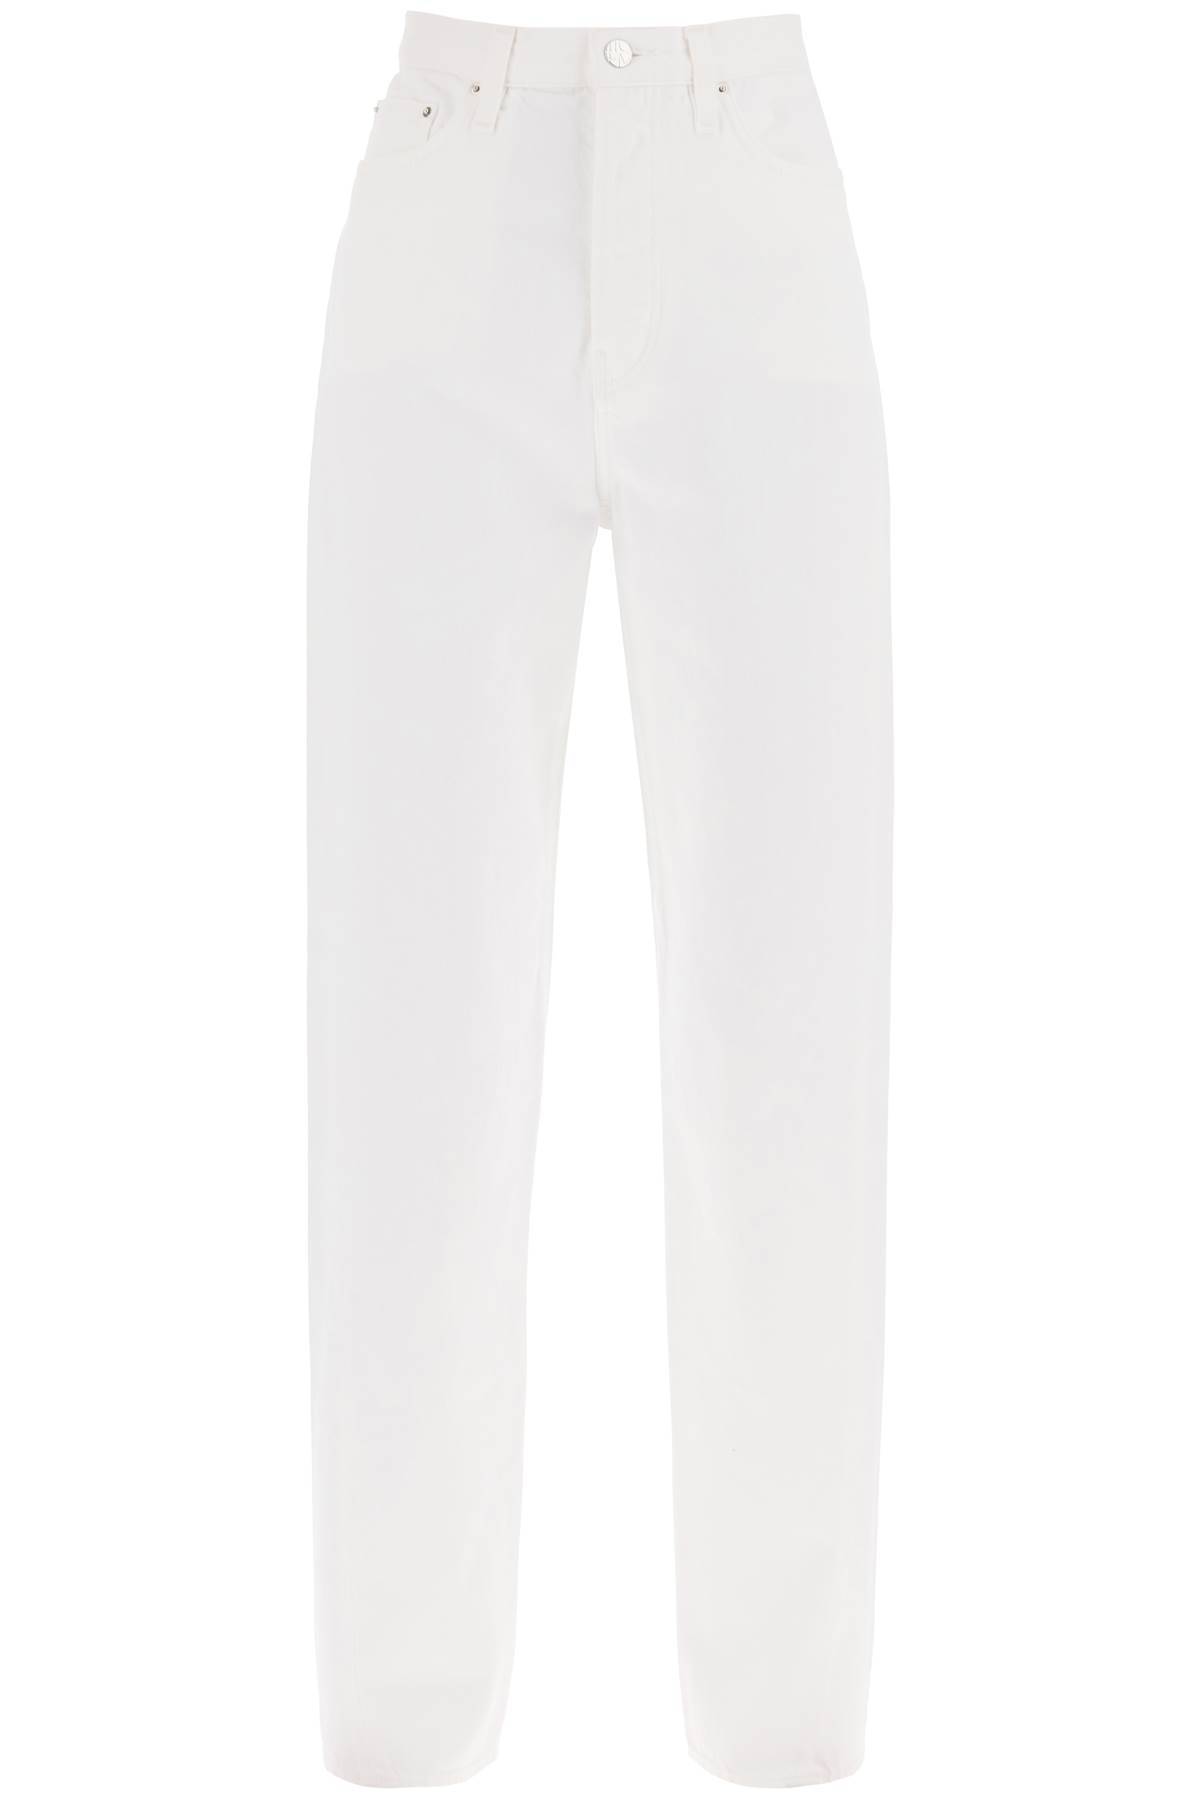 TOTEME twisted seam straight jeans